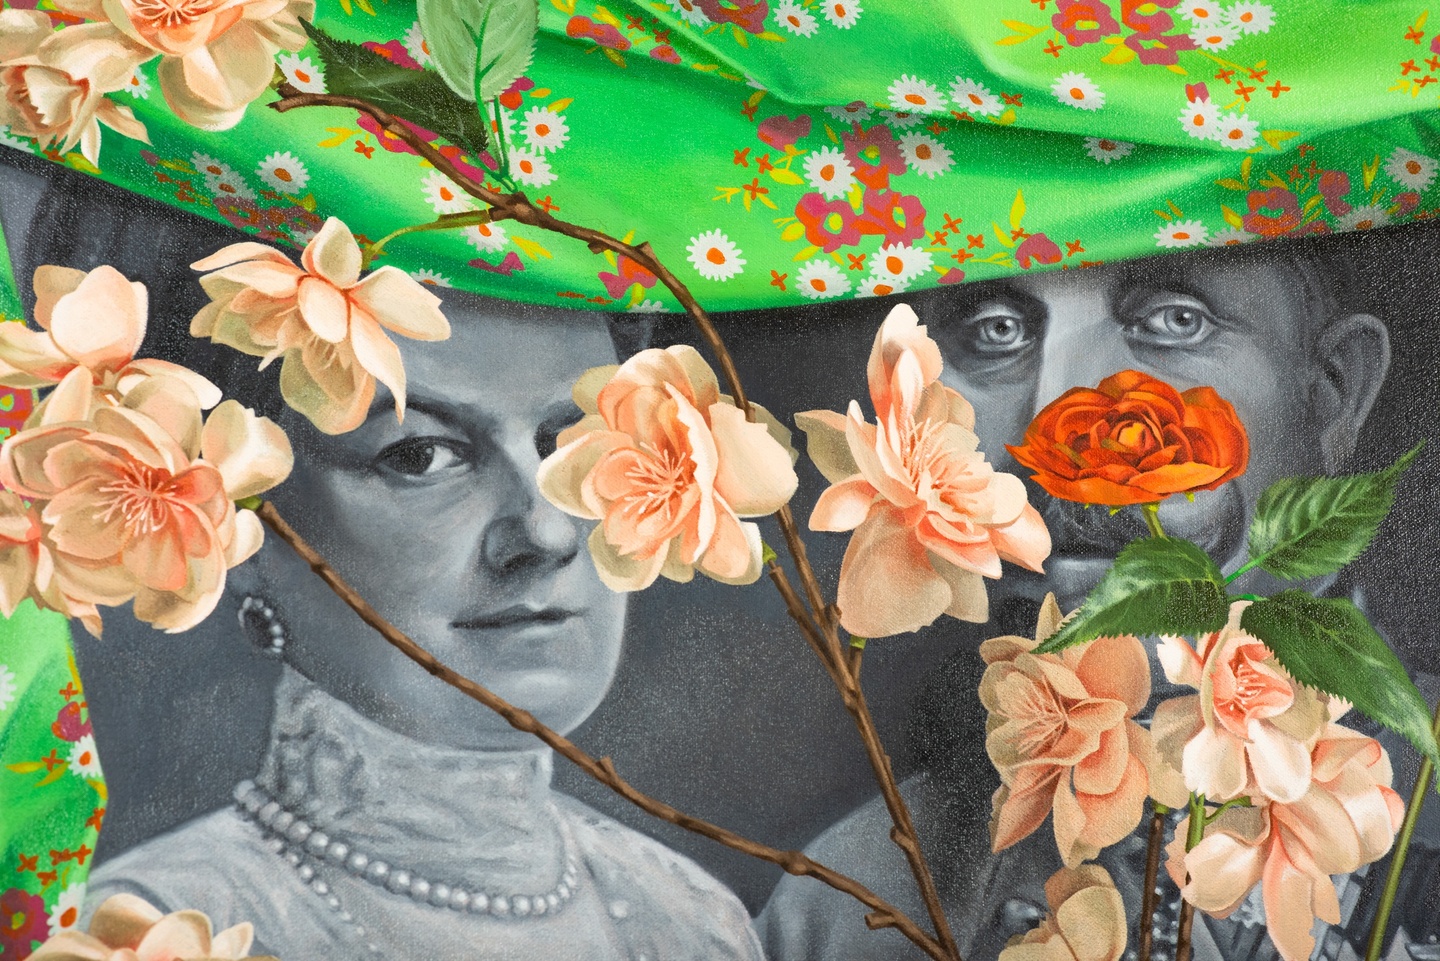 Detail of a trompe l'oeil style painting of a black and white photograph of two people in historical garb, partly obscured by a bright green fabric fold and a couple peach-colored roses.